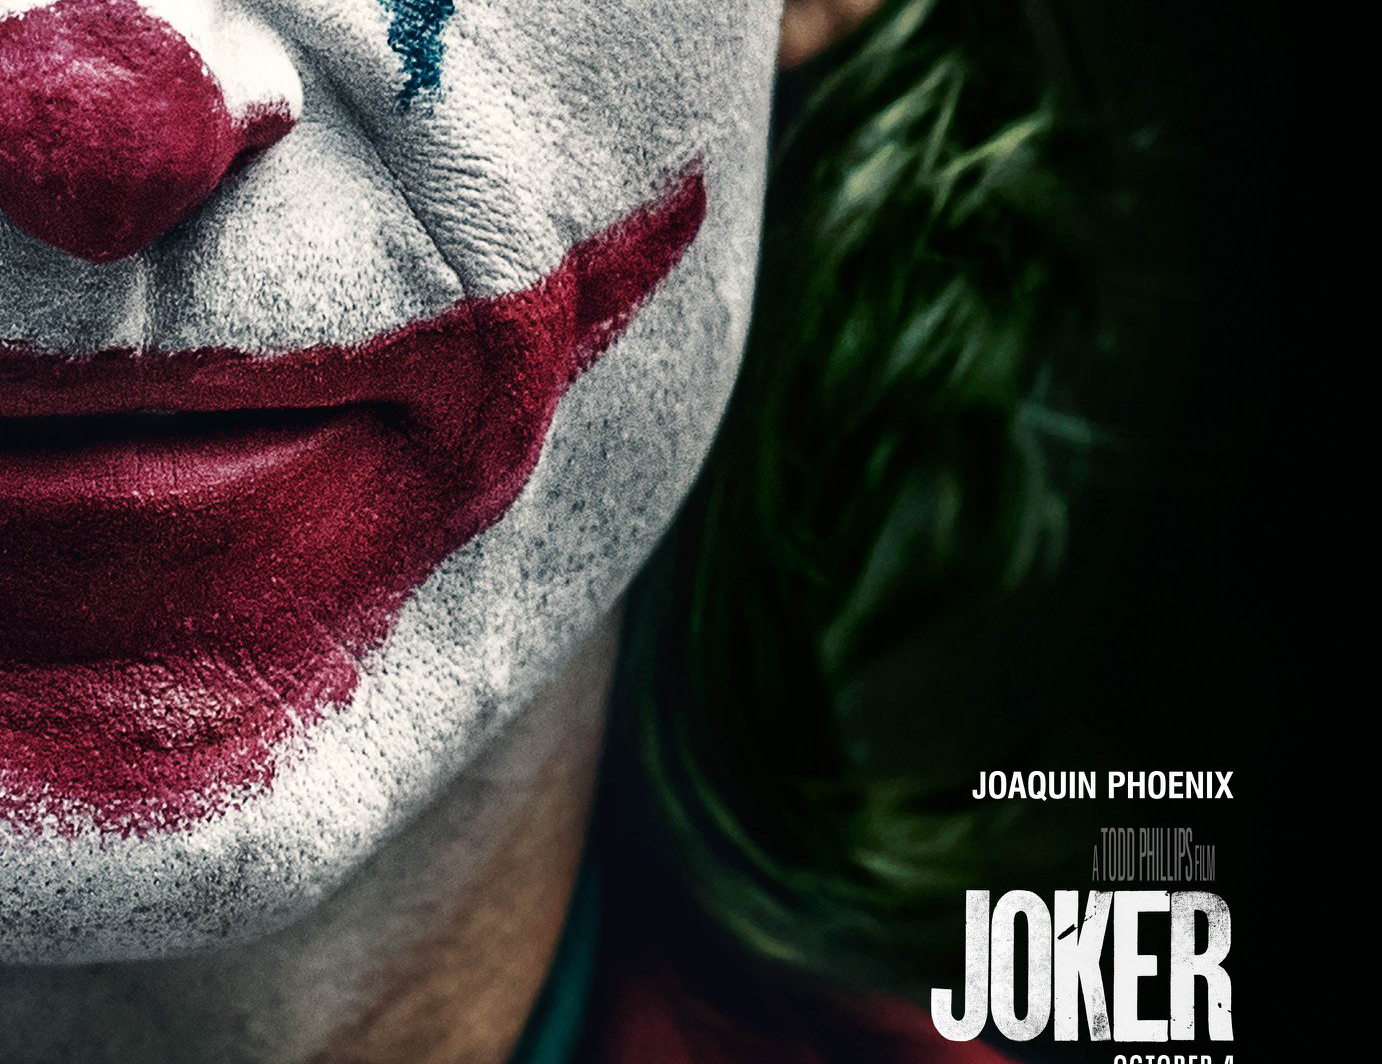 Joker: fear of violence leads to  controversy before release